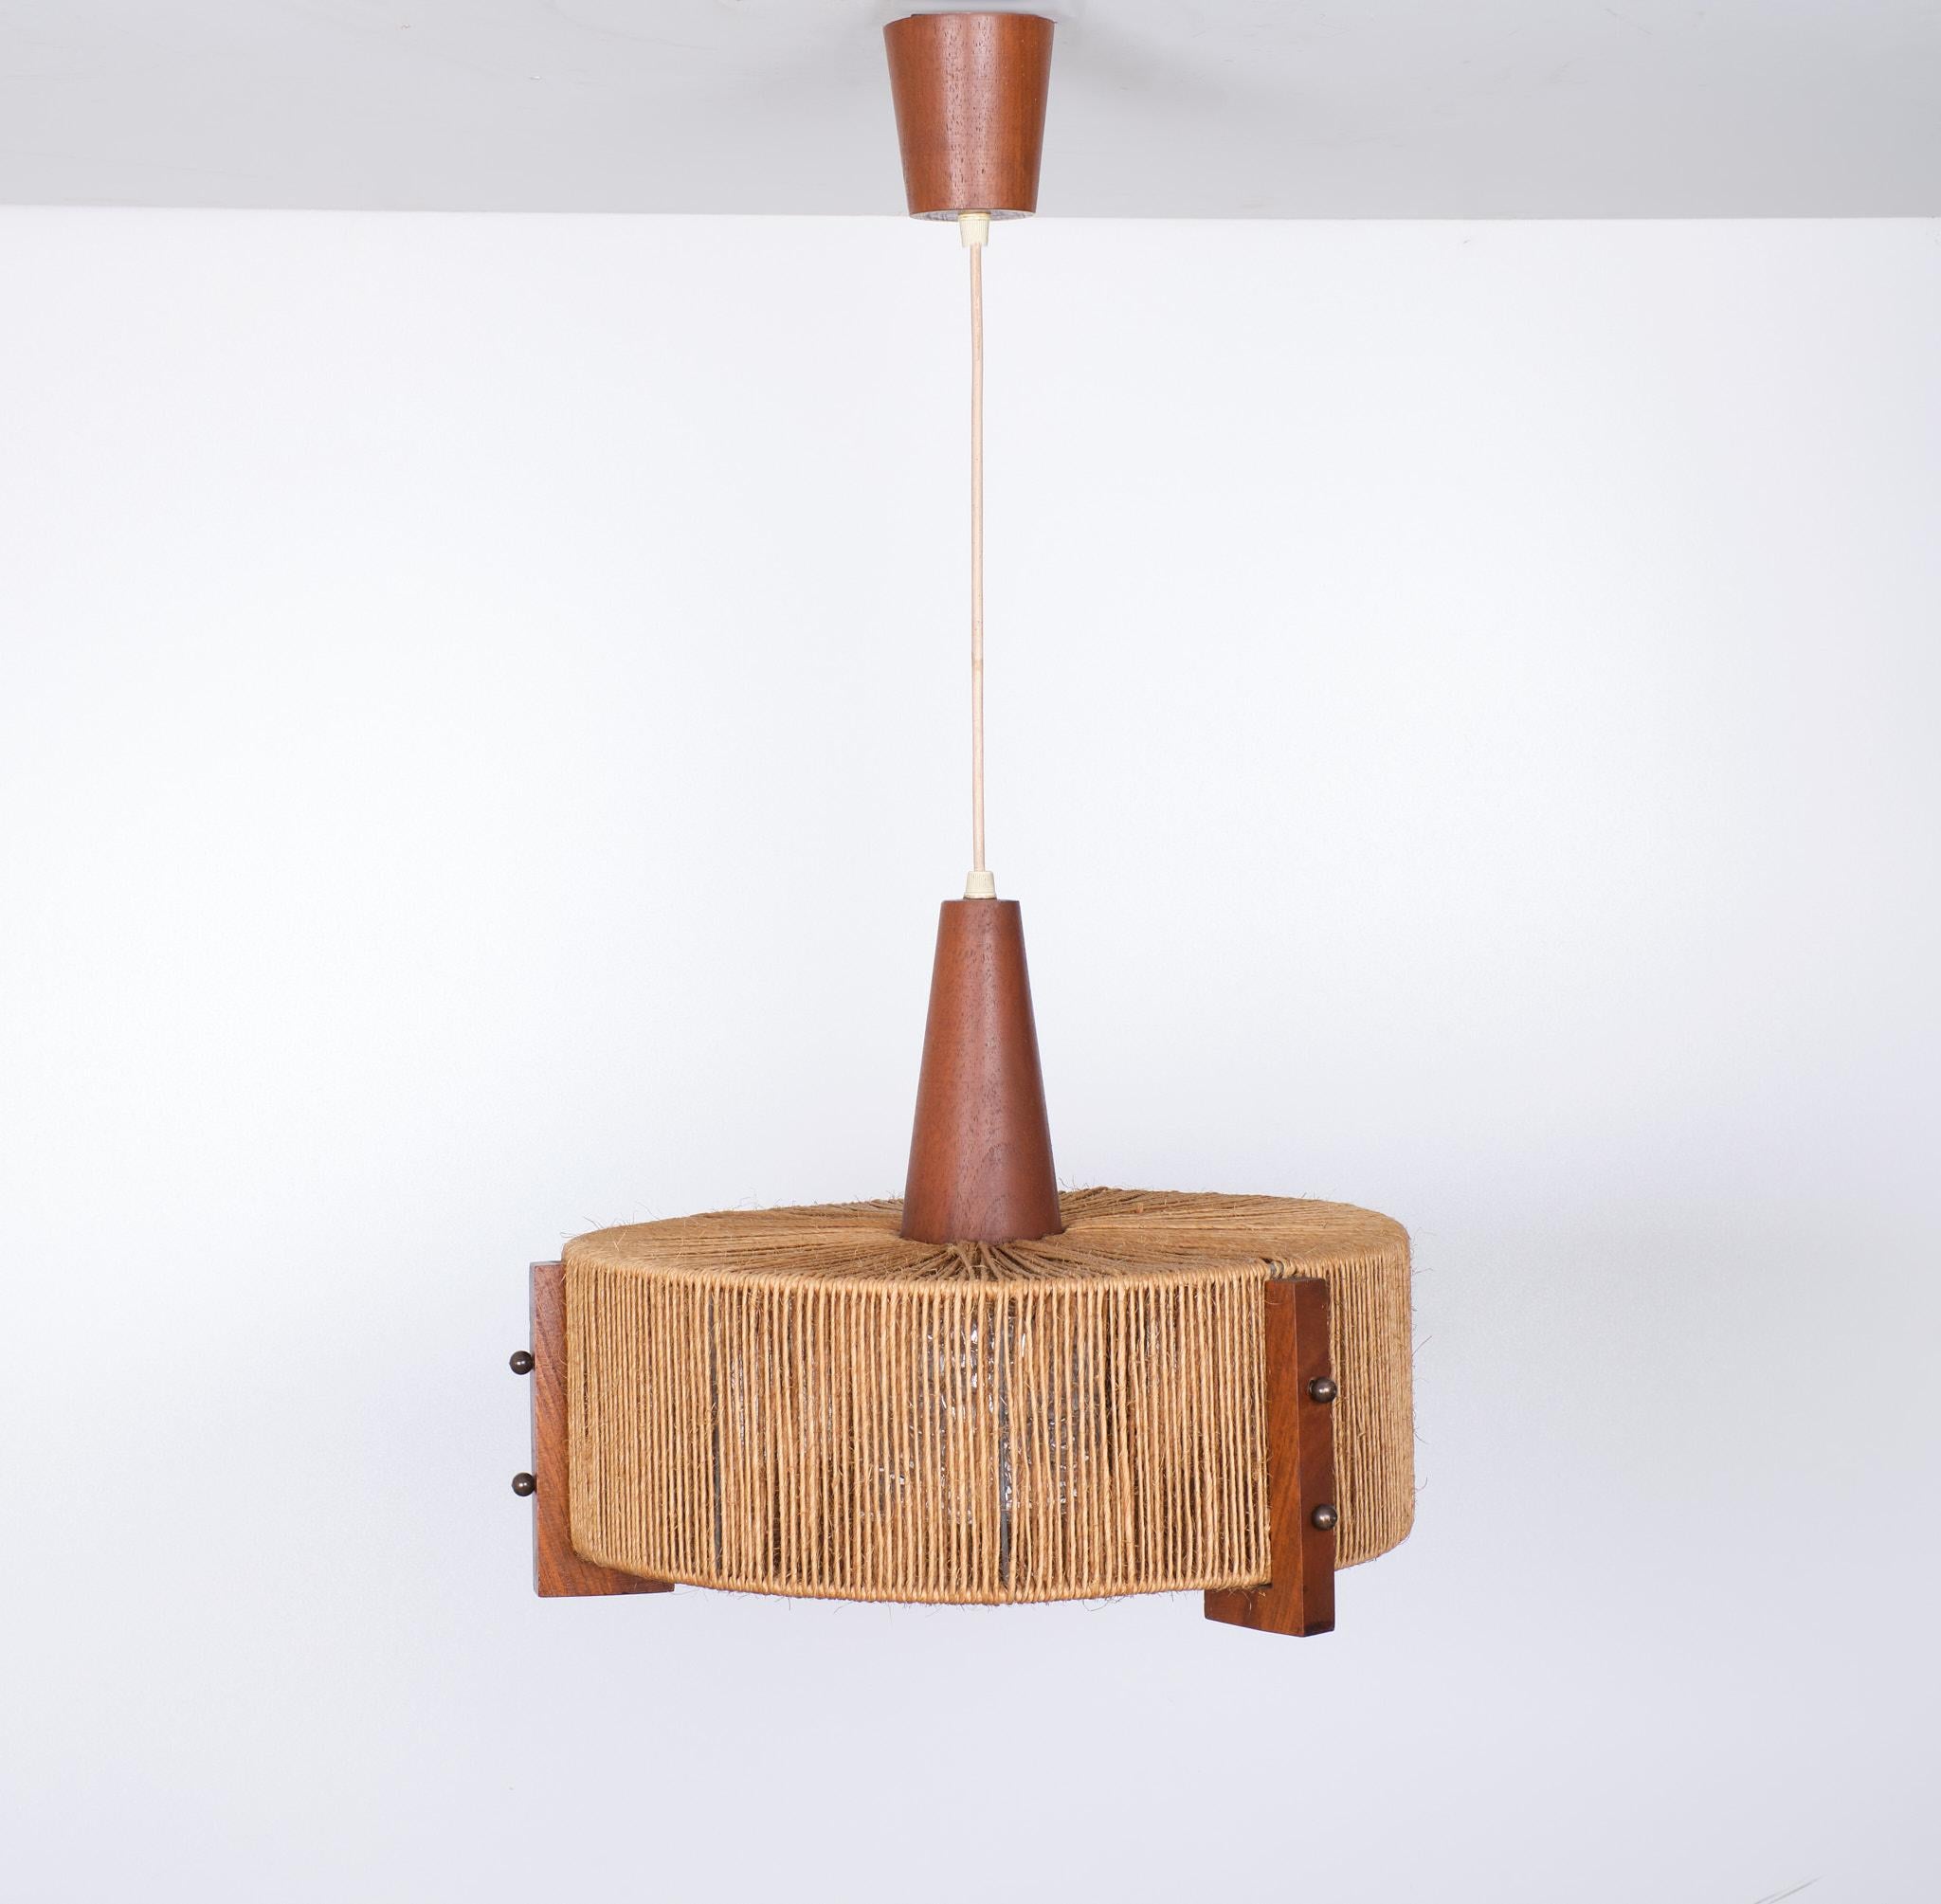 Beautiful Mid-Century Sisal Pendant lamp by Temde -luchten   1960's  Raffia shade .
solid Teak details . All complete with the Chrystal l Glass inner shade .
One large E27 bulb needed 